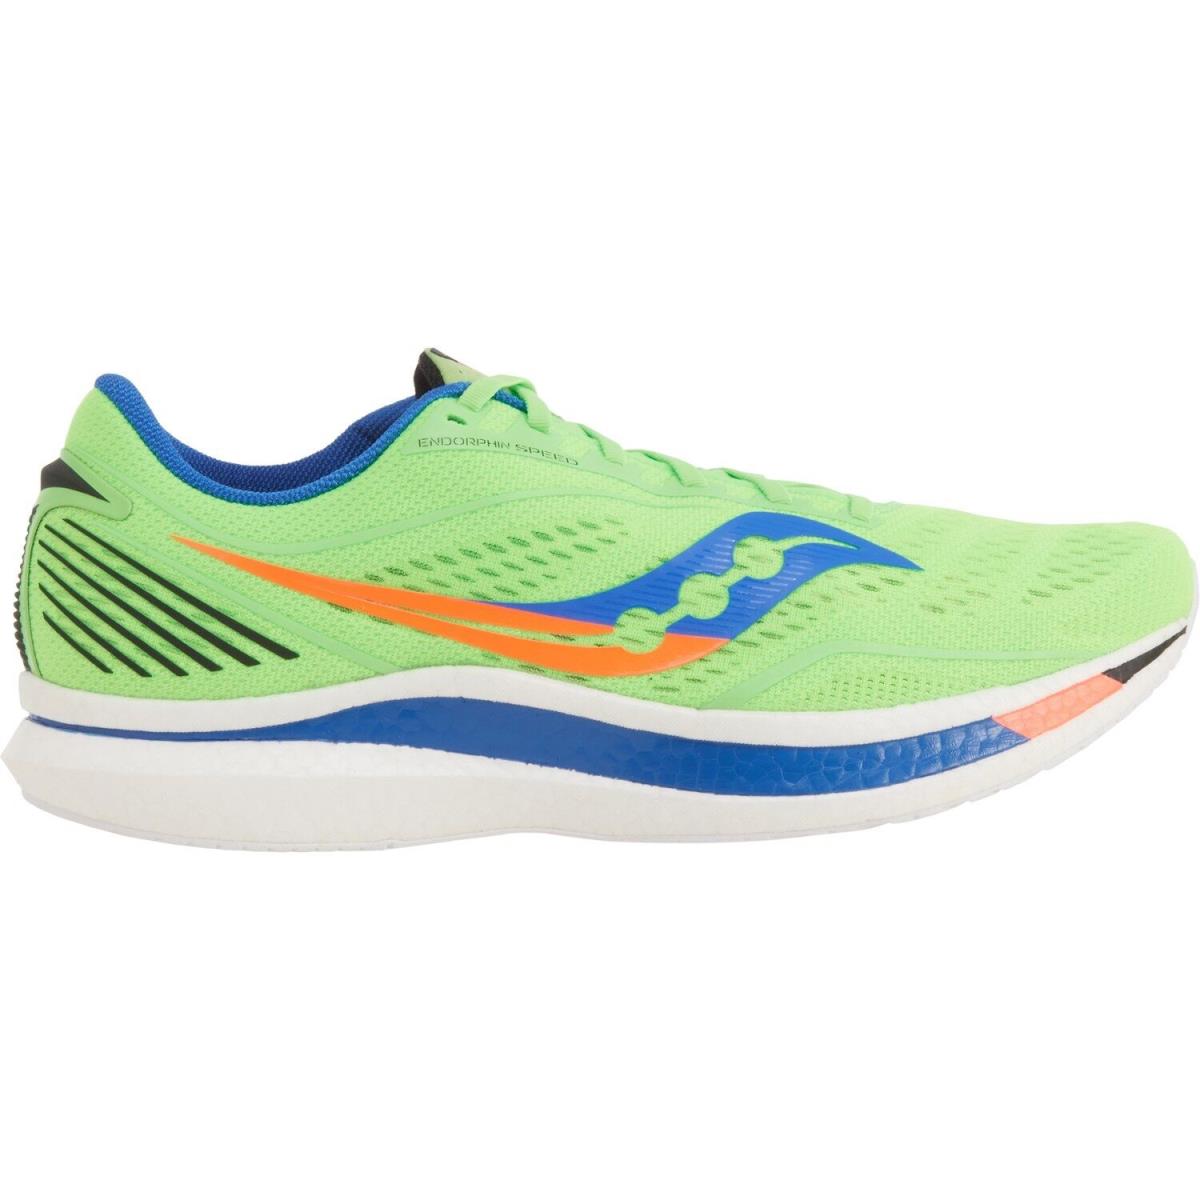 Saucony shoes Endorphin Speed Pitti - Green/Blue 0